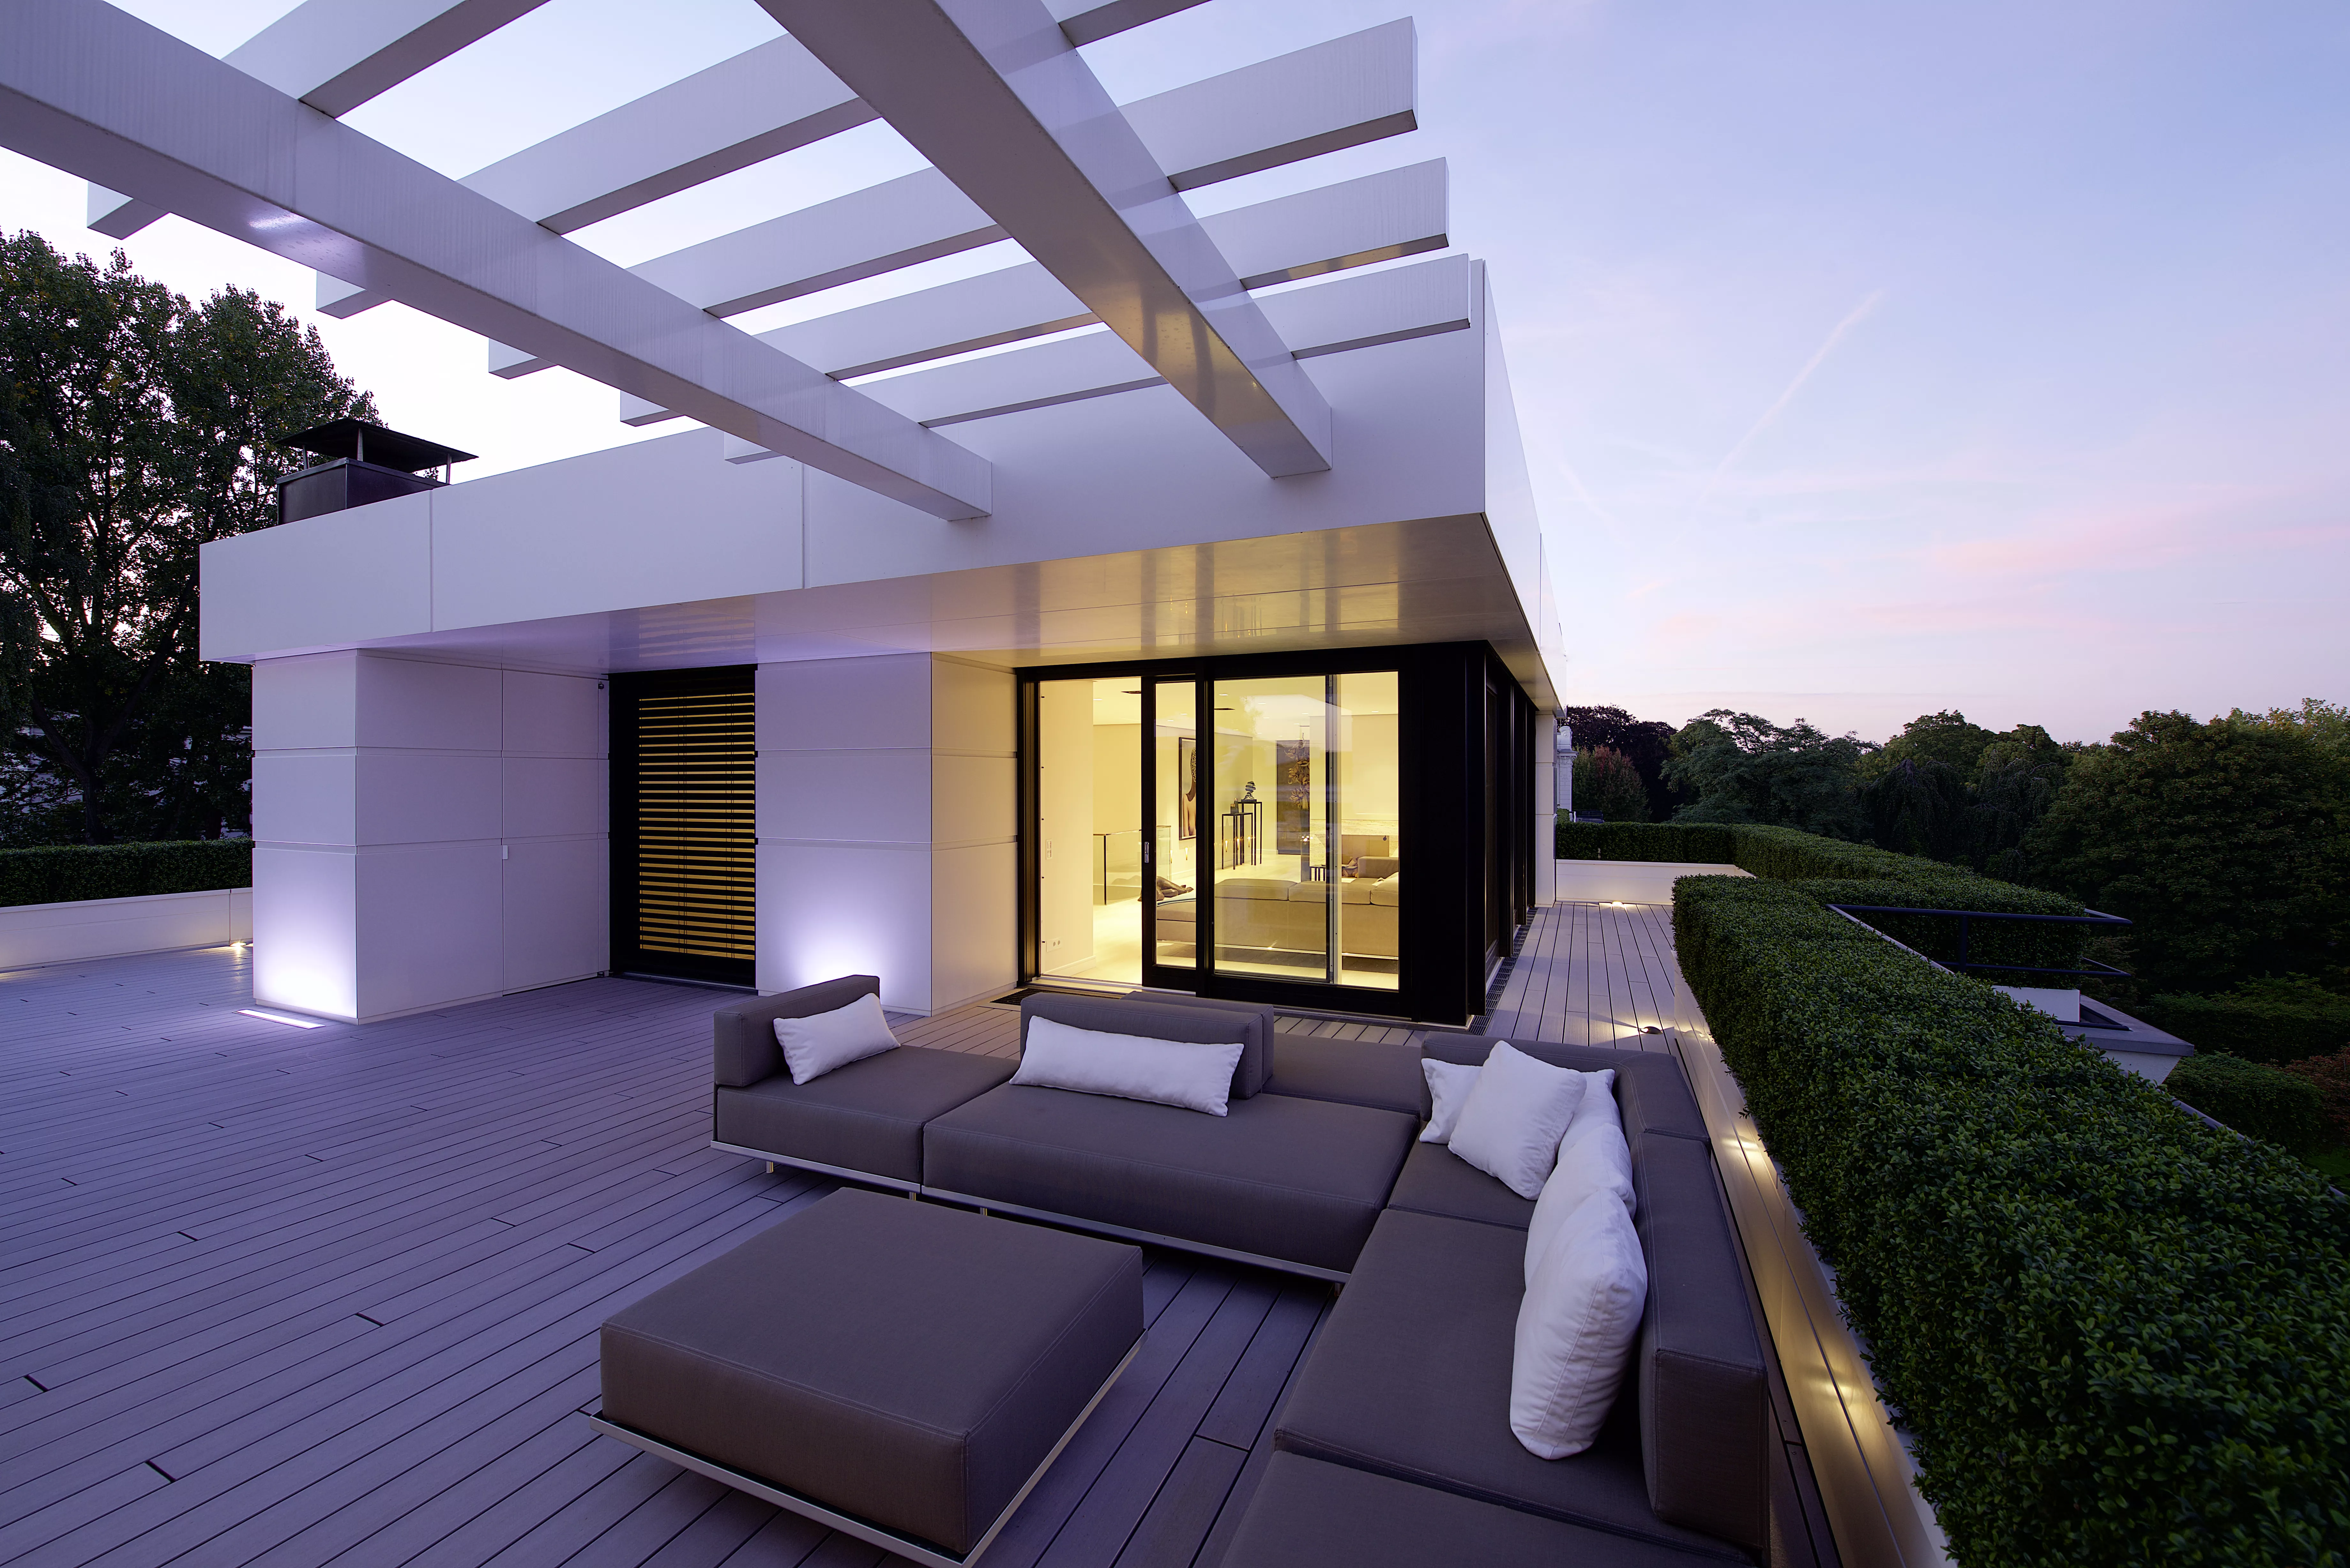 A dream Penthouse: HIMACS shines above the roofs of Hamburg